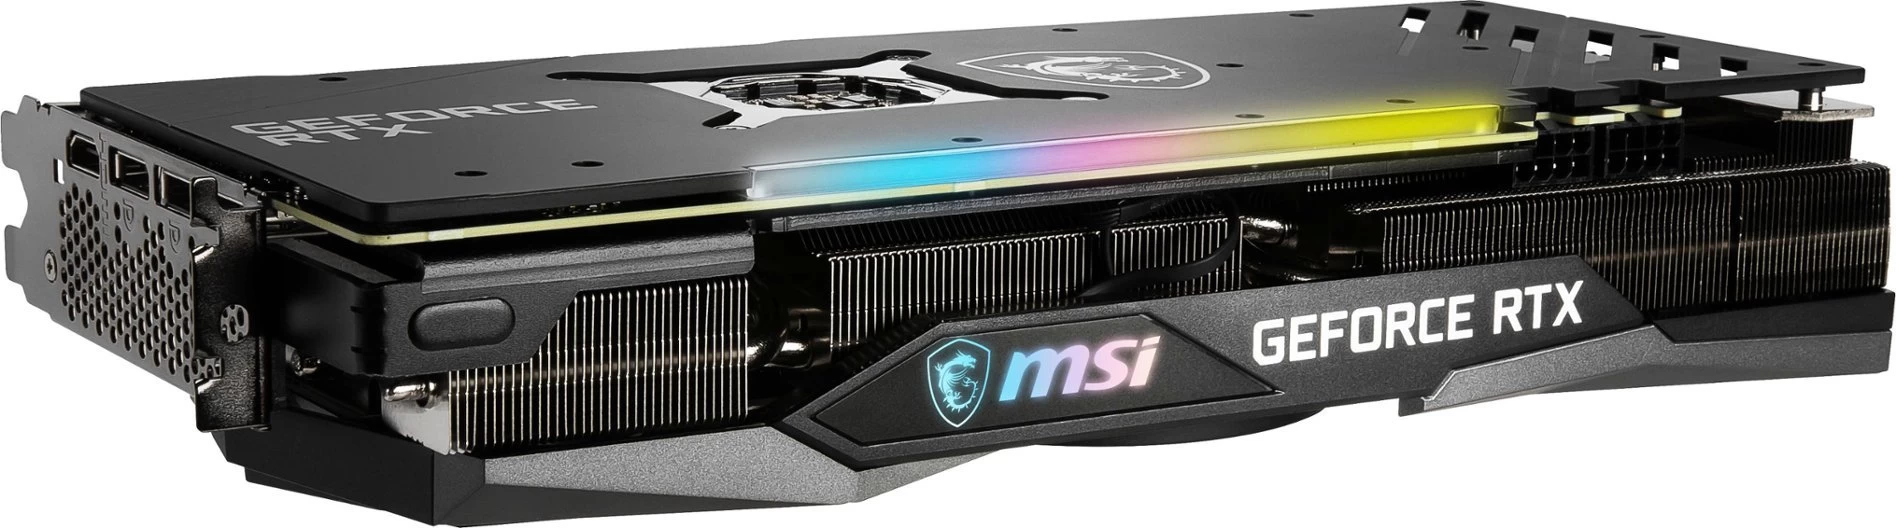 MSI GeForce RTX 3060 GAMING X TRIO 12G Front View